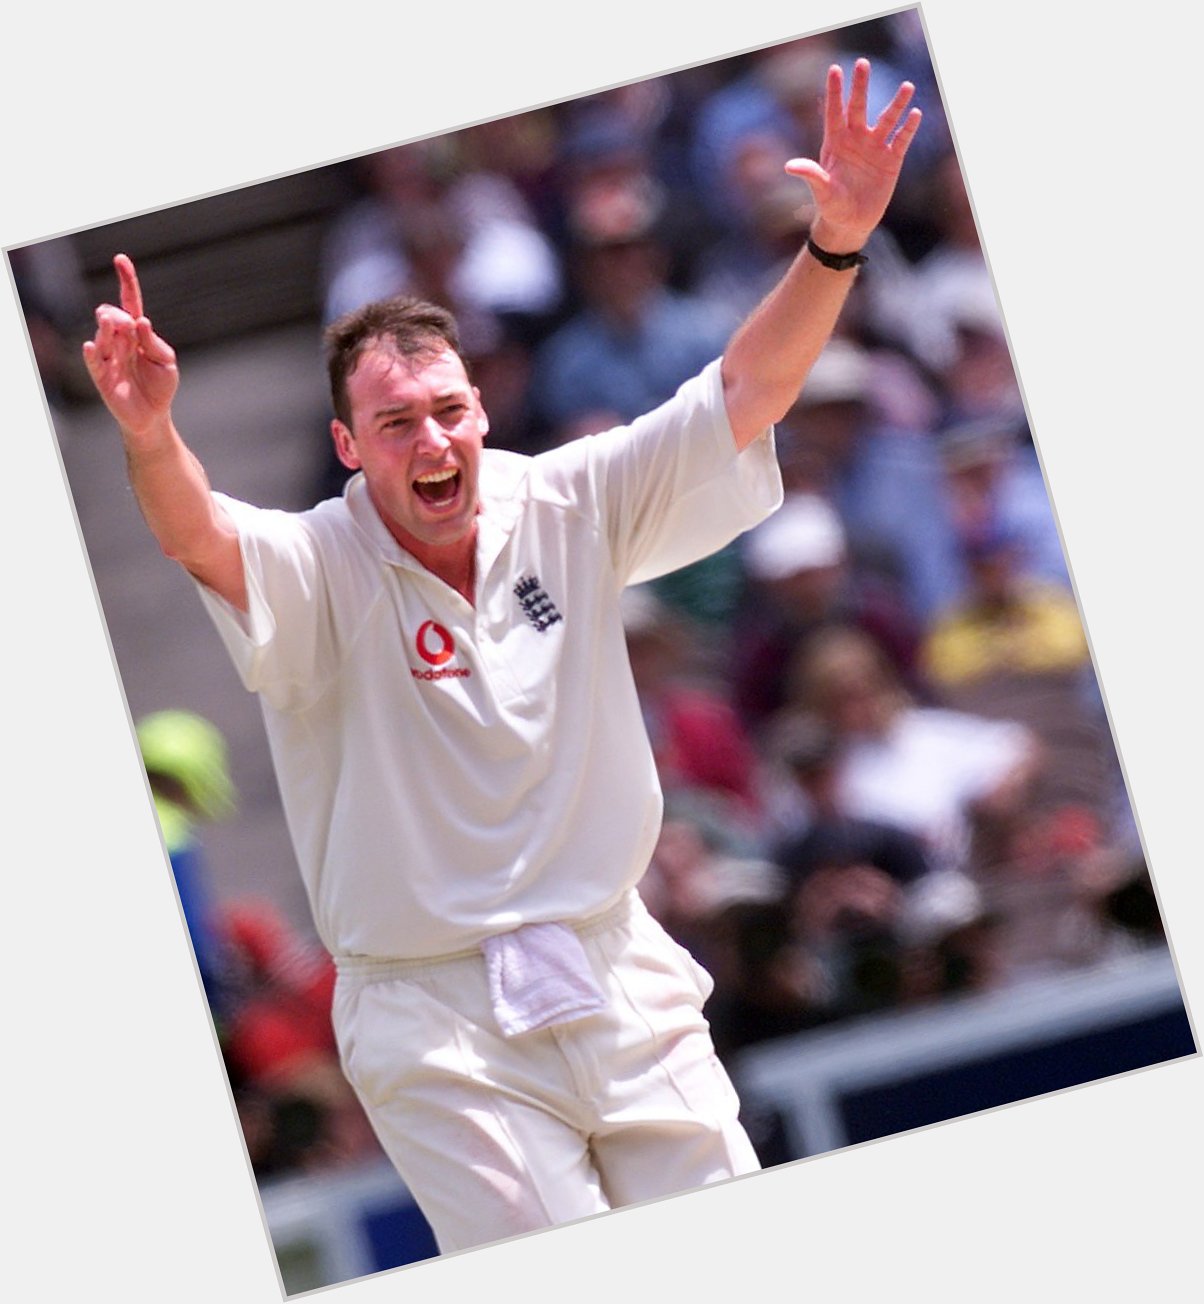 Happy Birthday to one of top seam bowlers of the 90s, with 177 wickets in 46 Tests, Angus Fraser! 